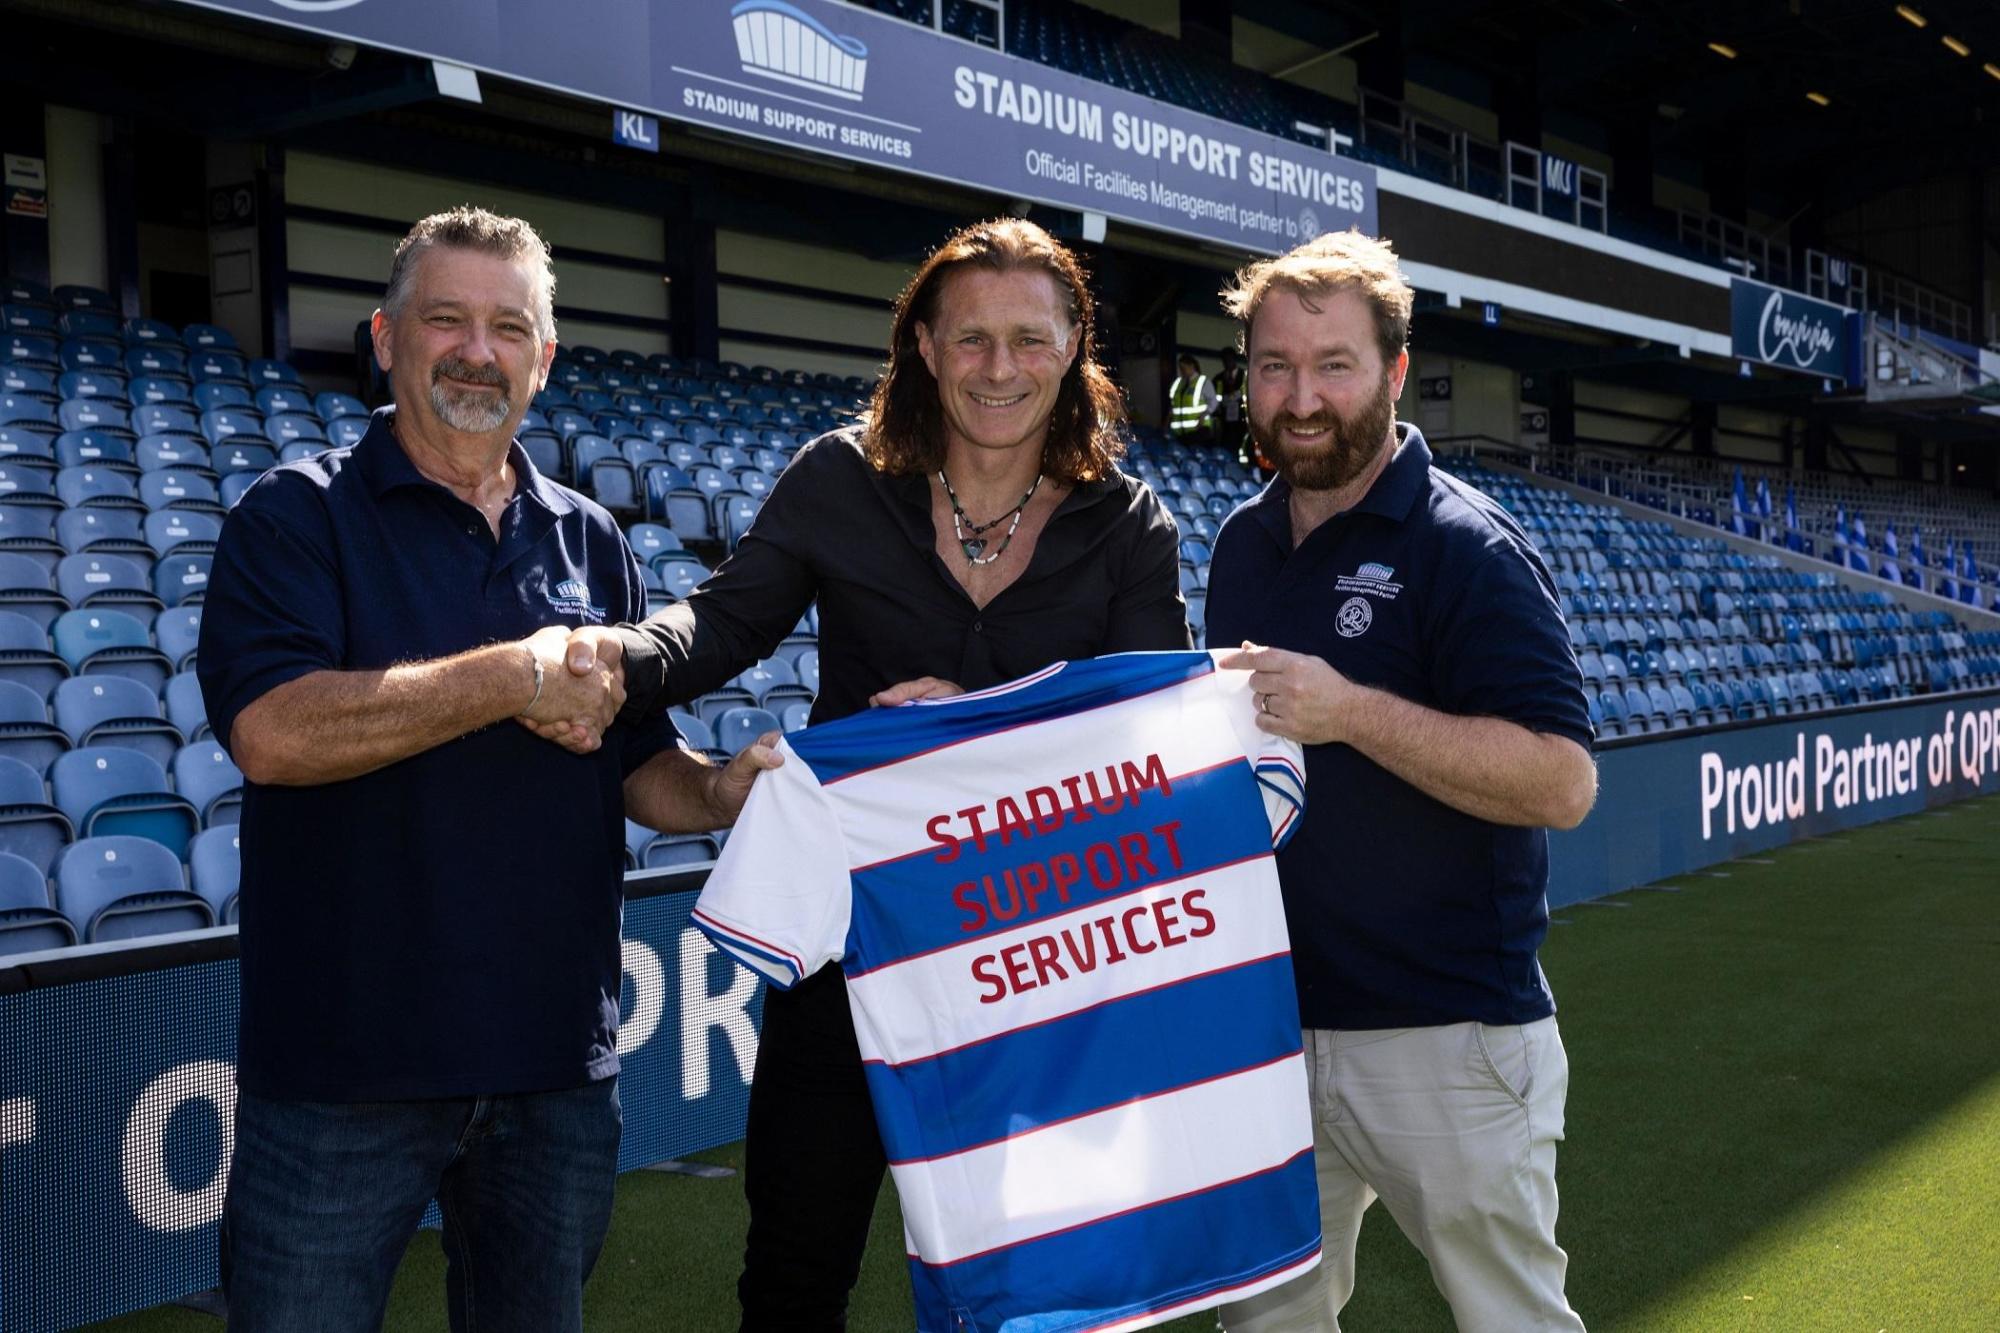 Stadium Support Services Signs Sponsorship Deal with QPR